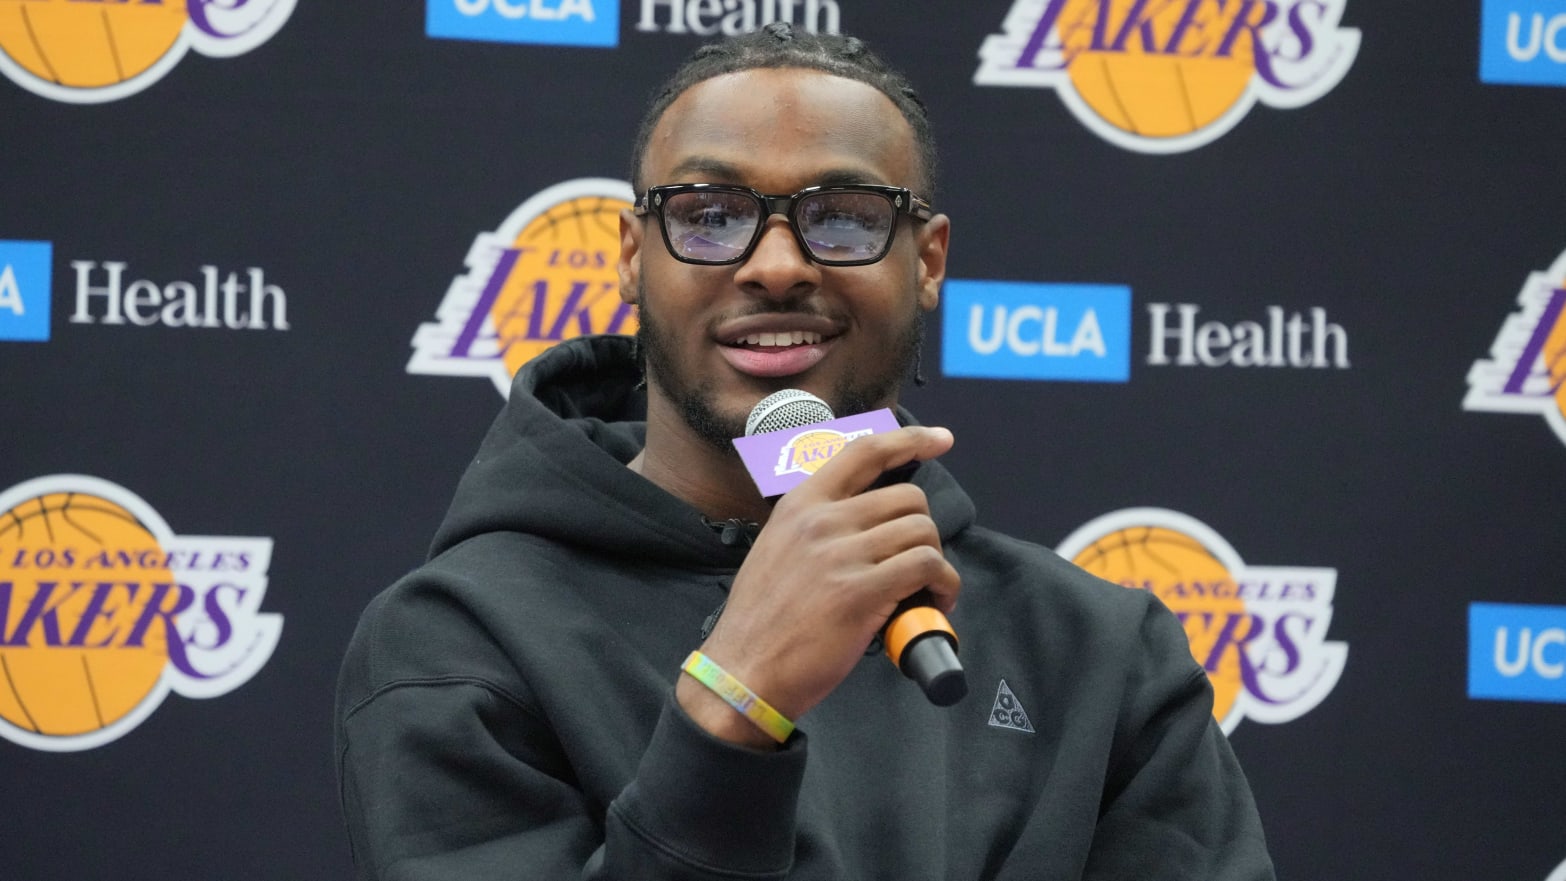 Bronny James smiles while holding a microphone at a Lakers press event.